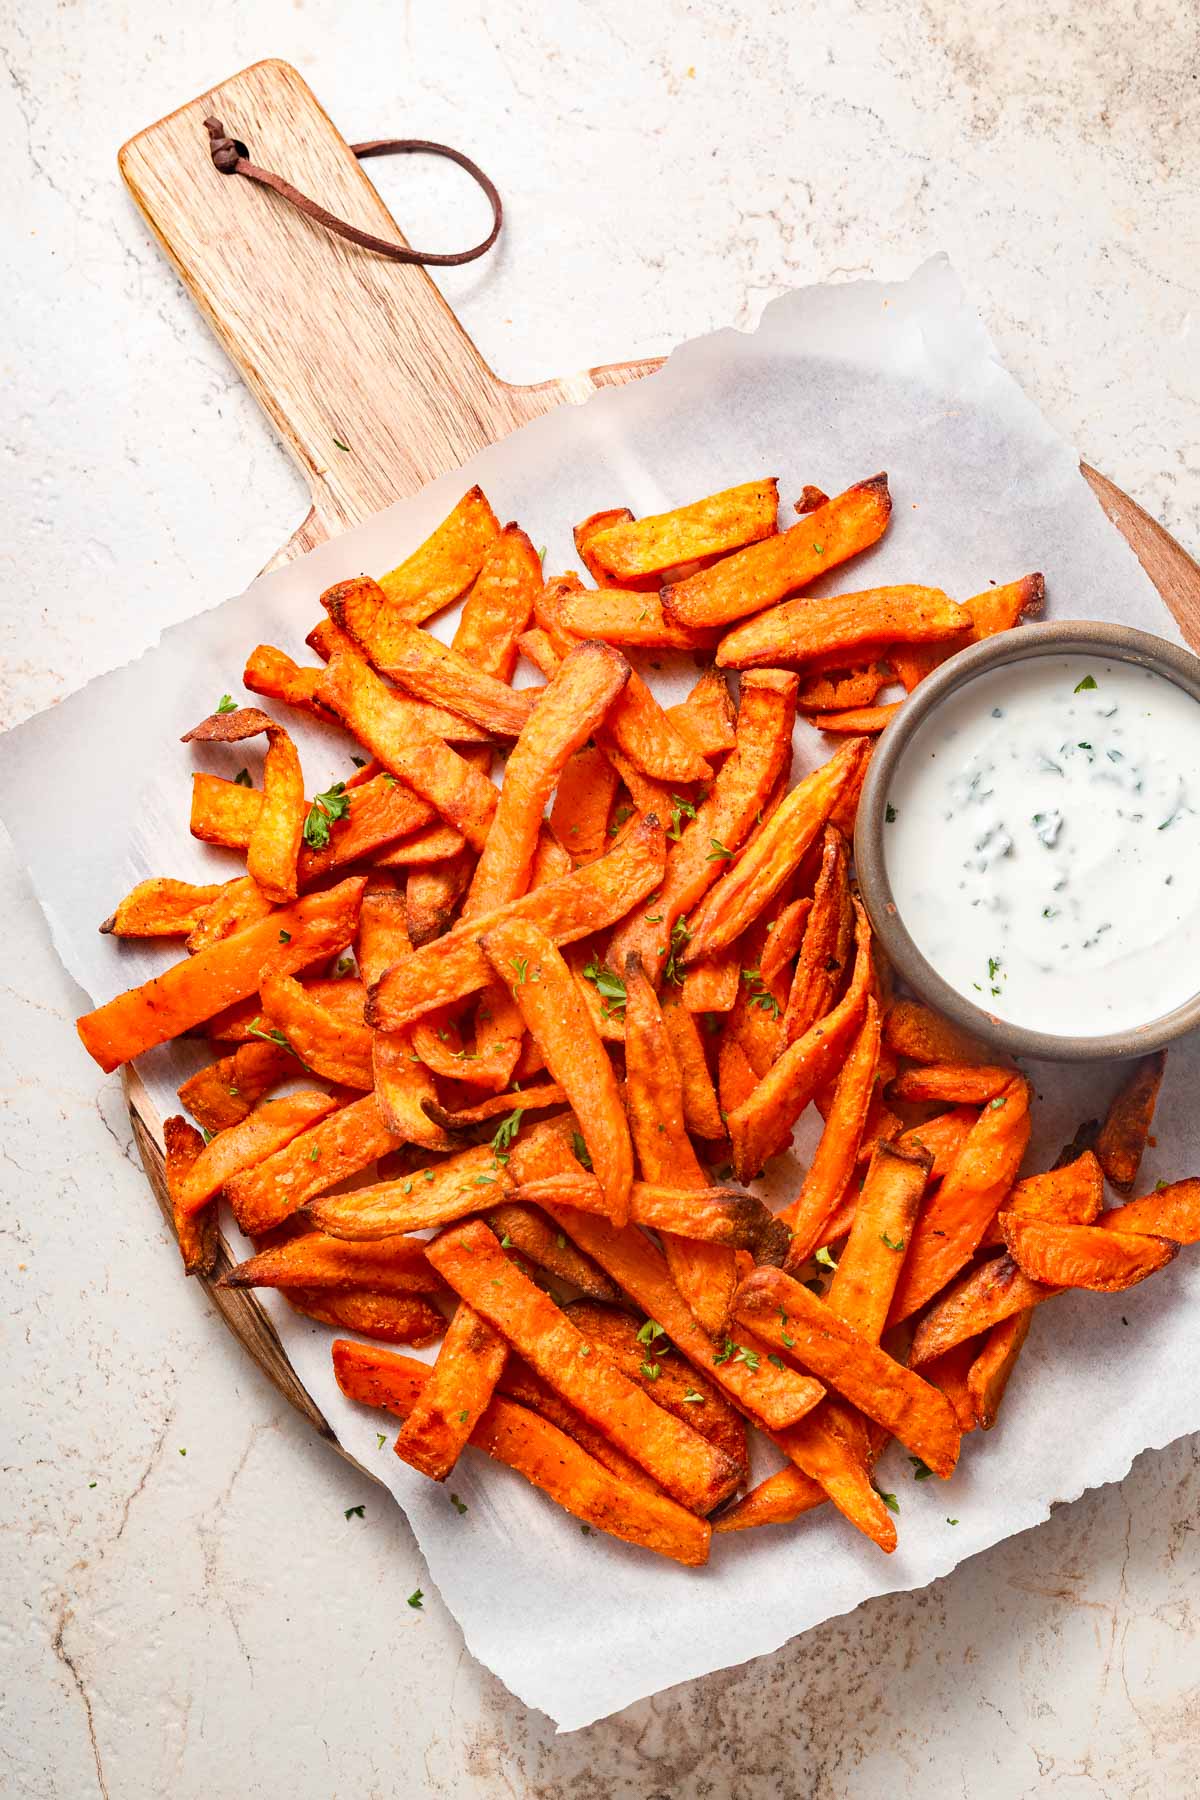 frozen sweet potato is air fried and presented with a dip.